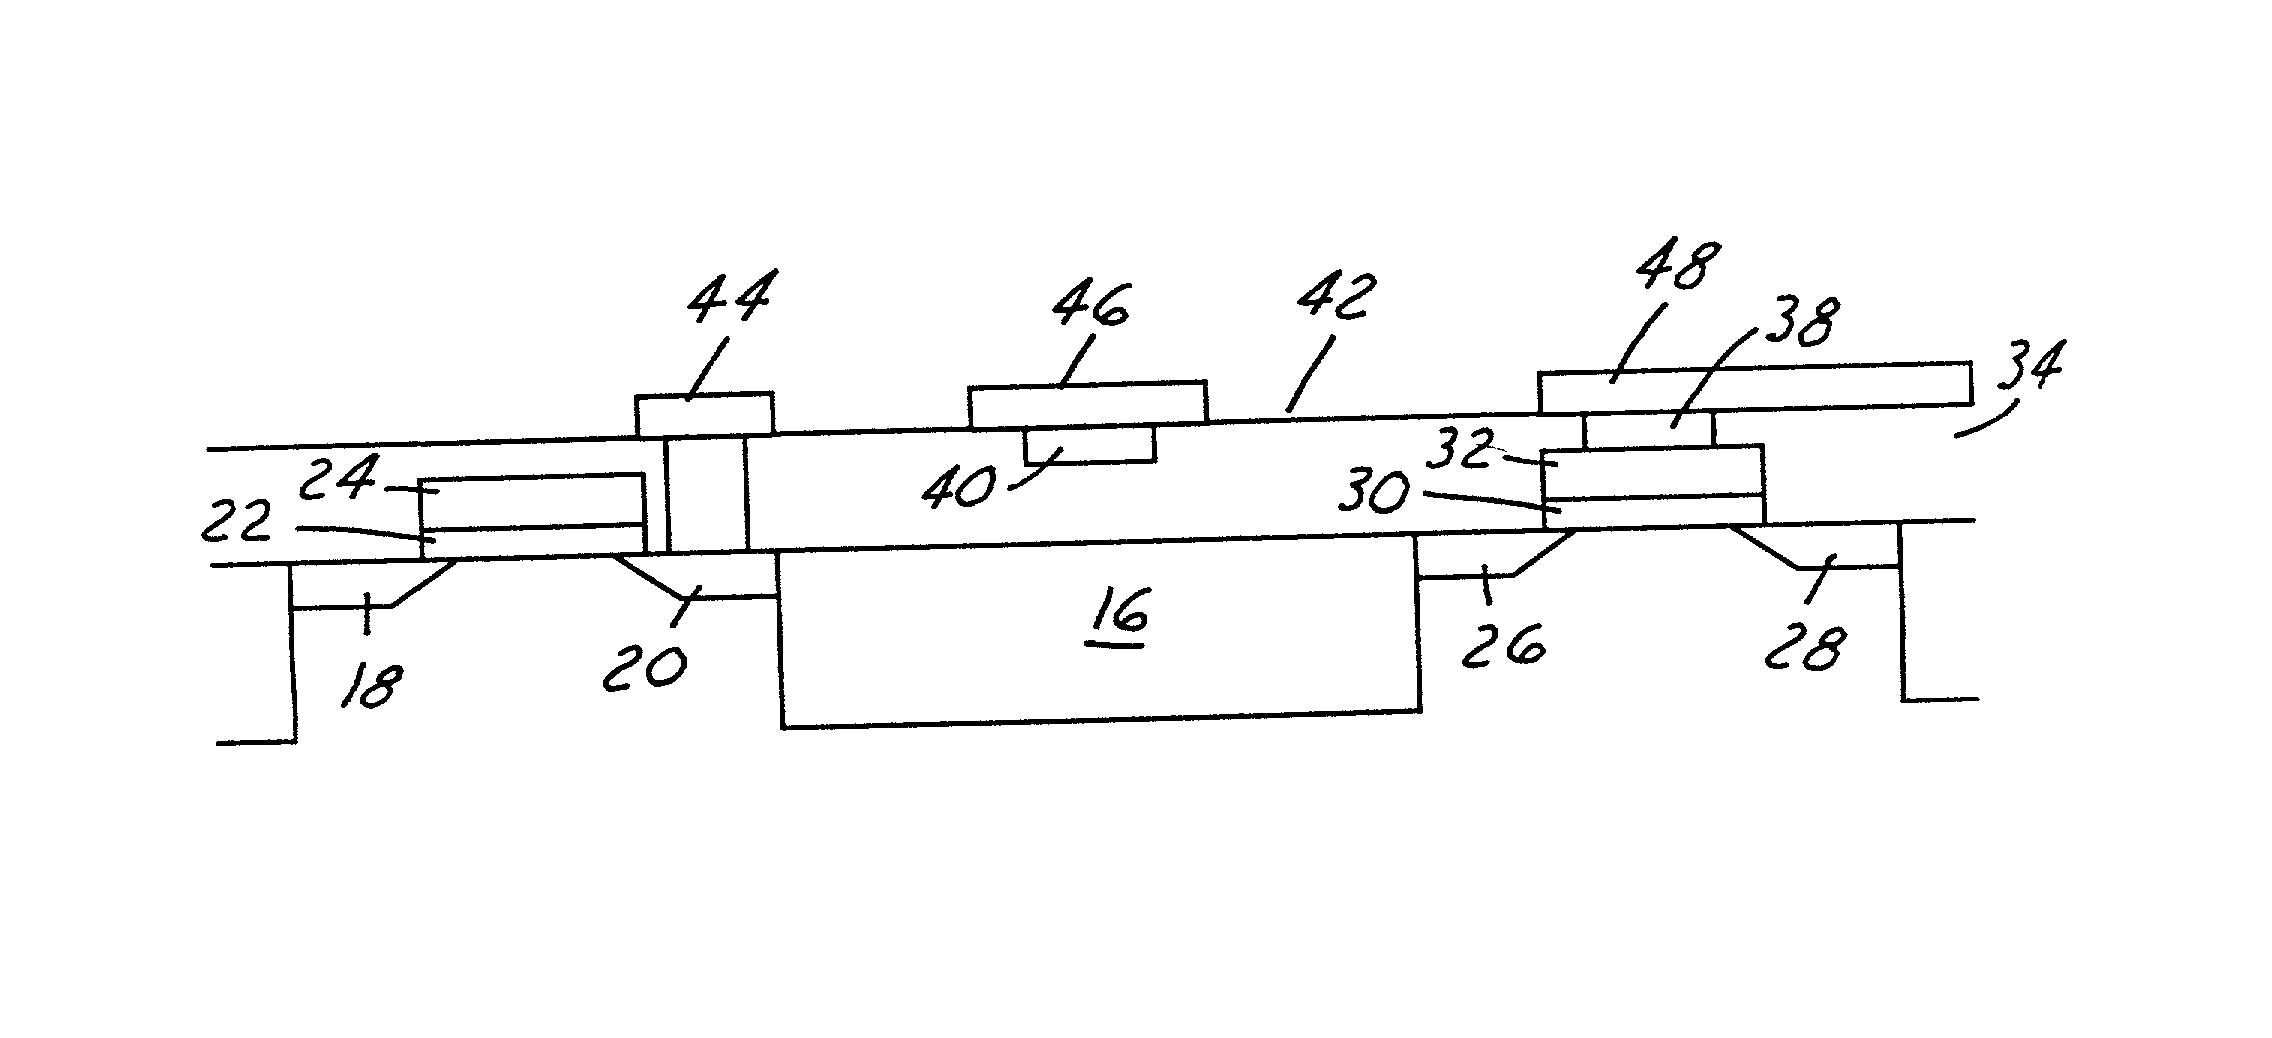 Semiconductor device incorporating elements formed of refractory metal-silicon-nitrogen and method for fabrication